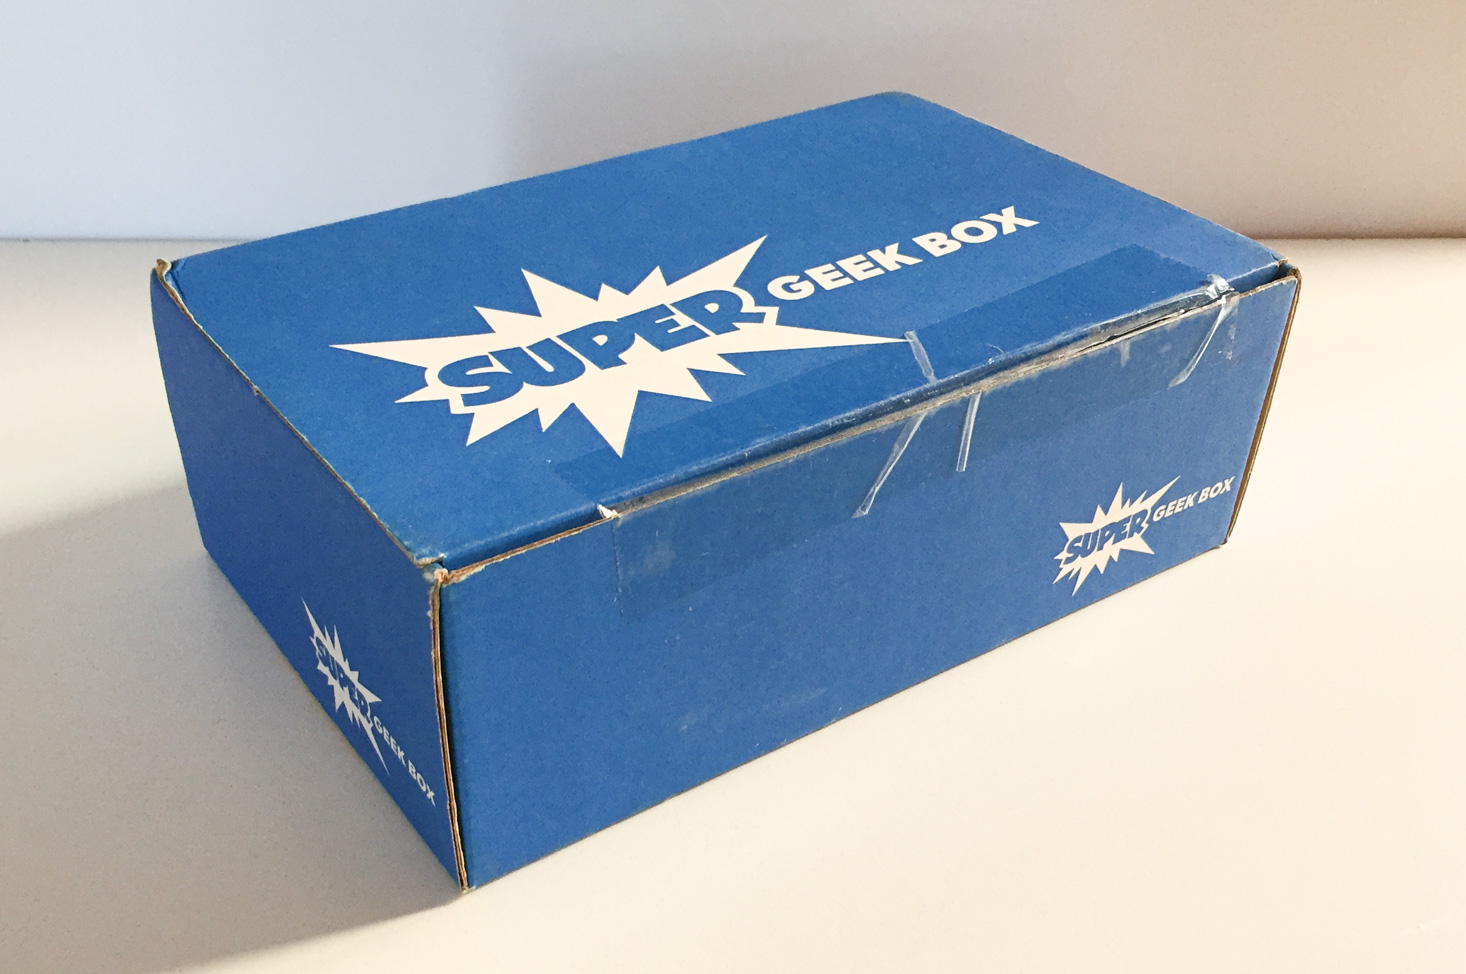 Super Geek Box Subscription Review + Coupon – January 2017